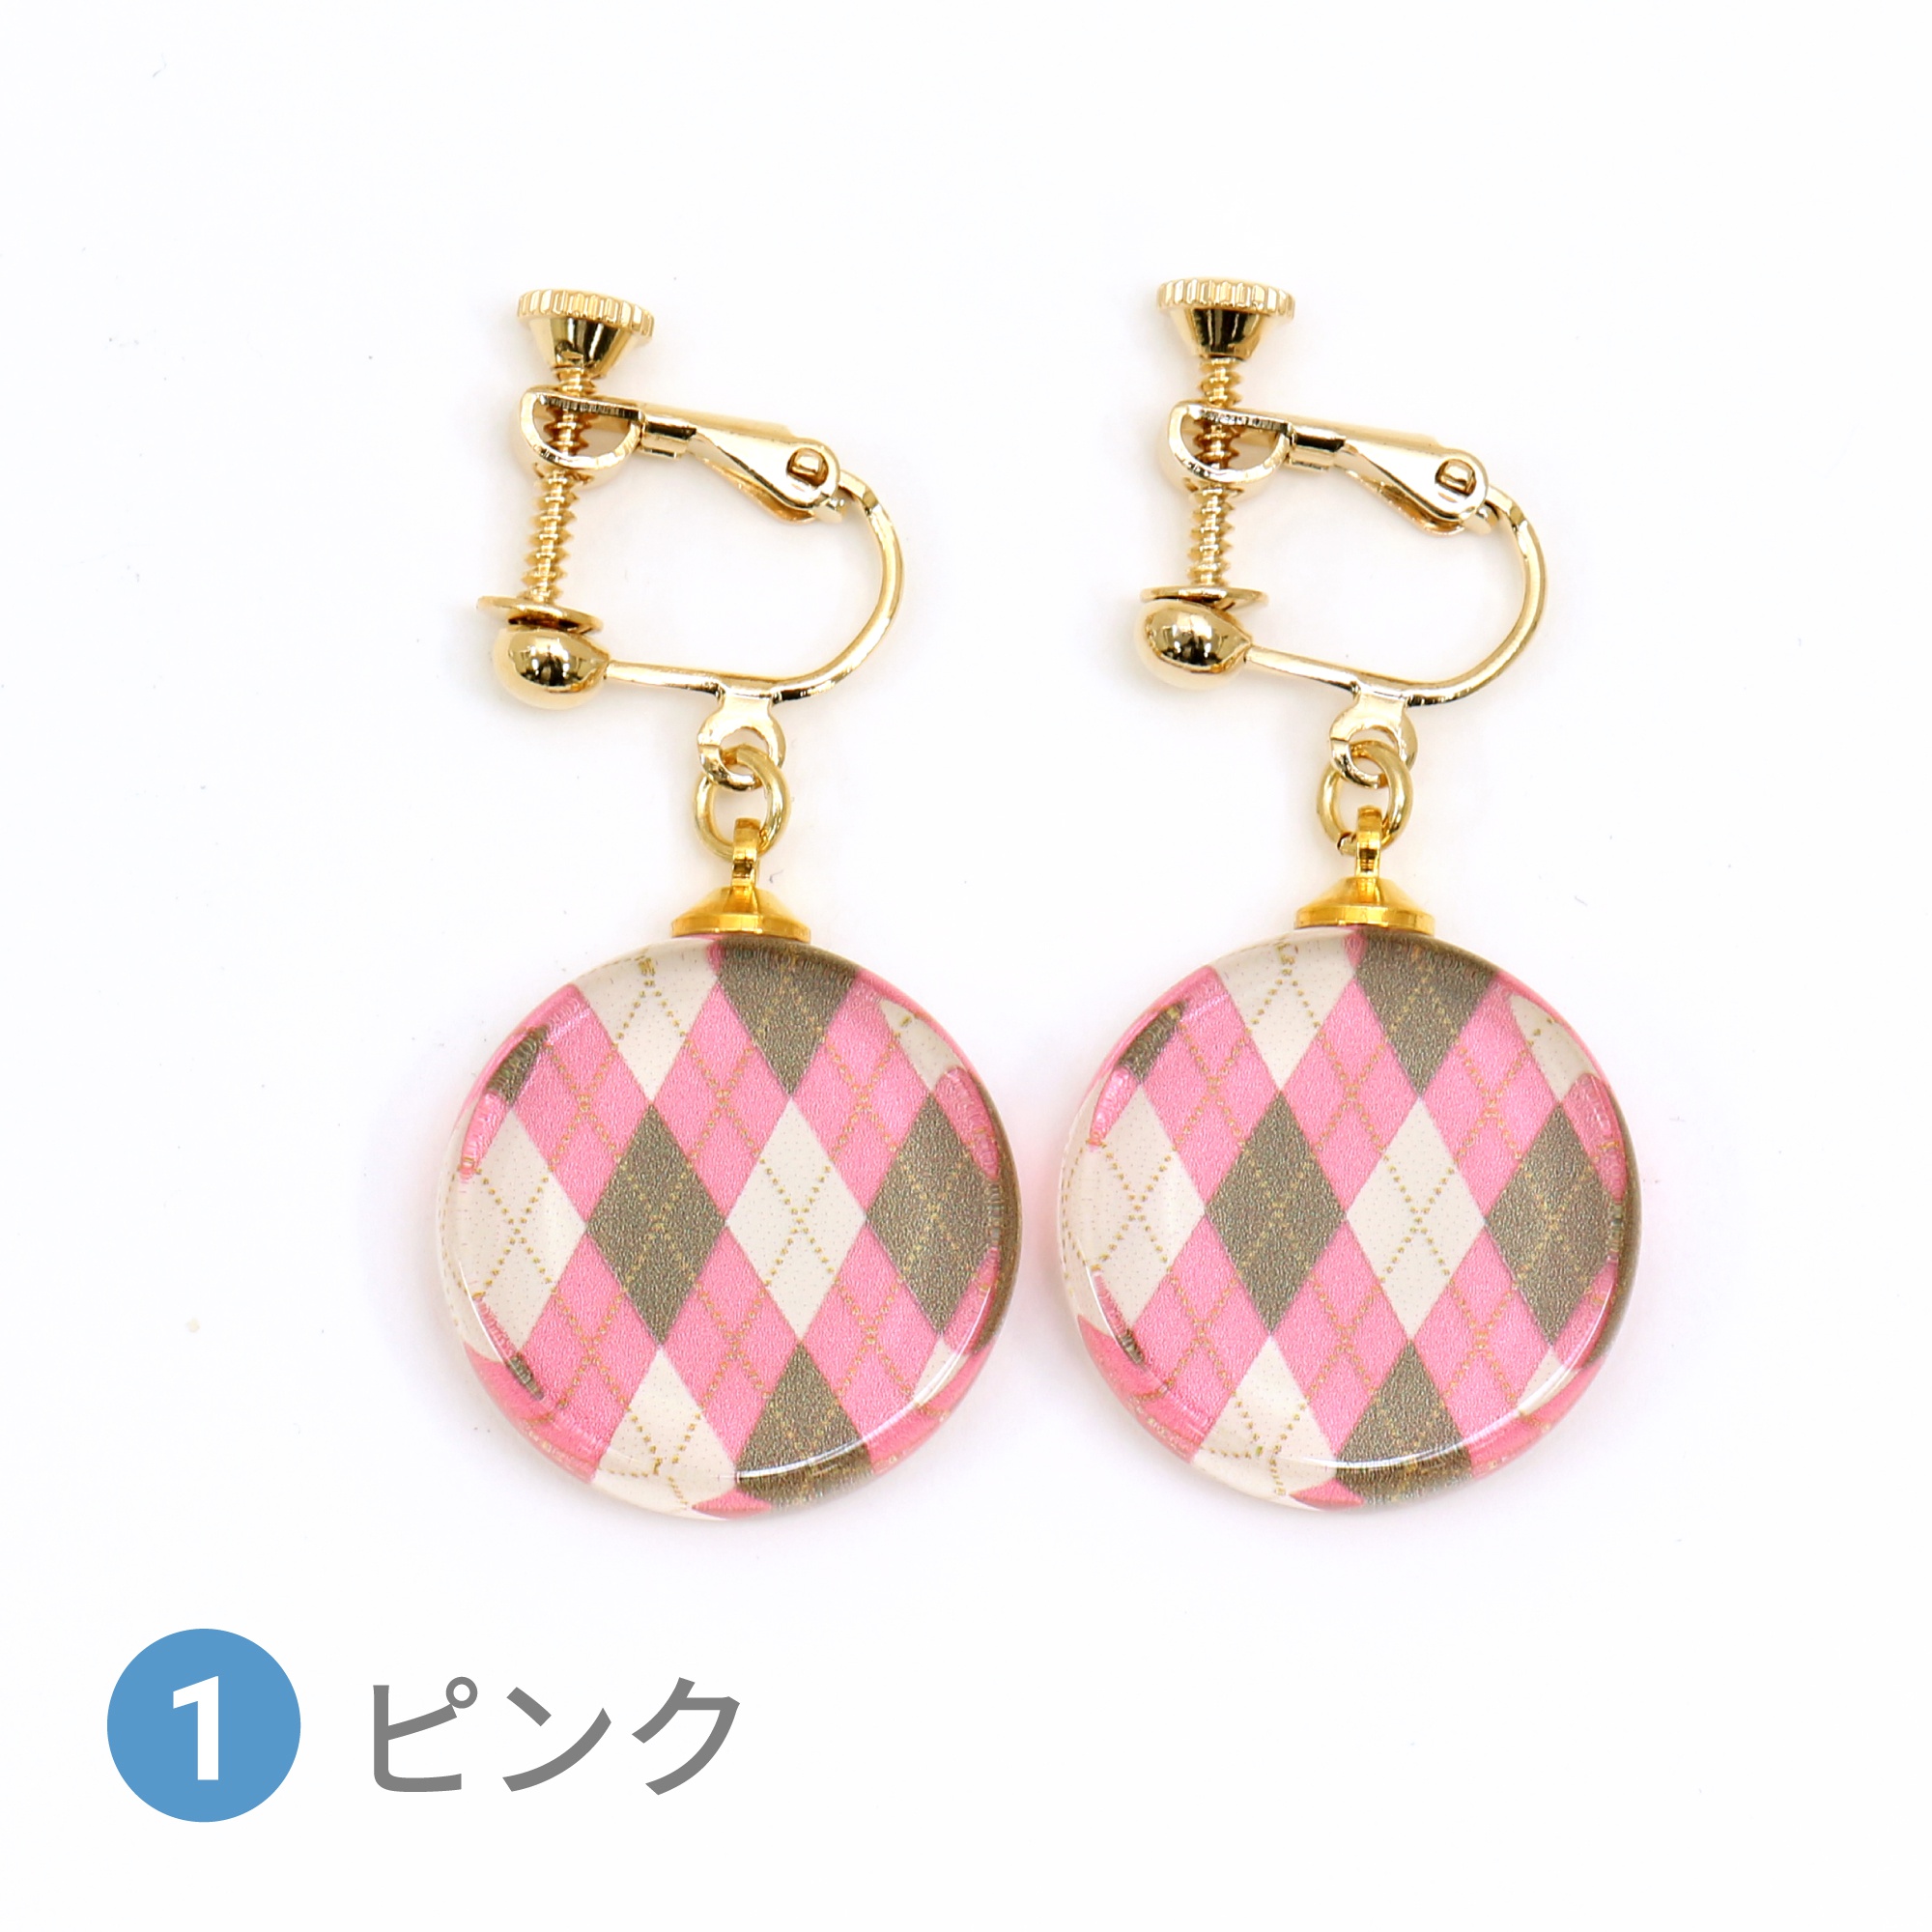 Glass accessories Earring ARGYLE pink round shape